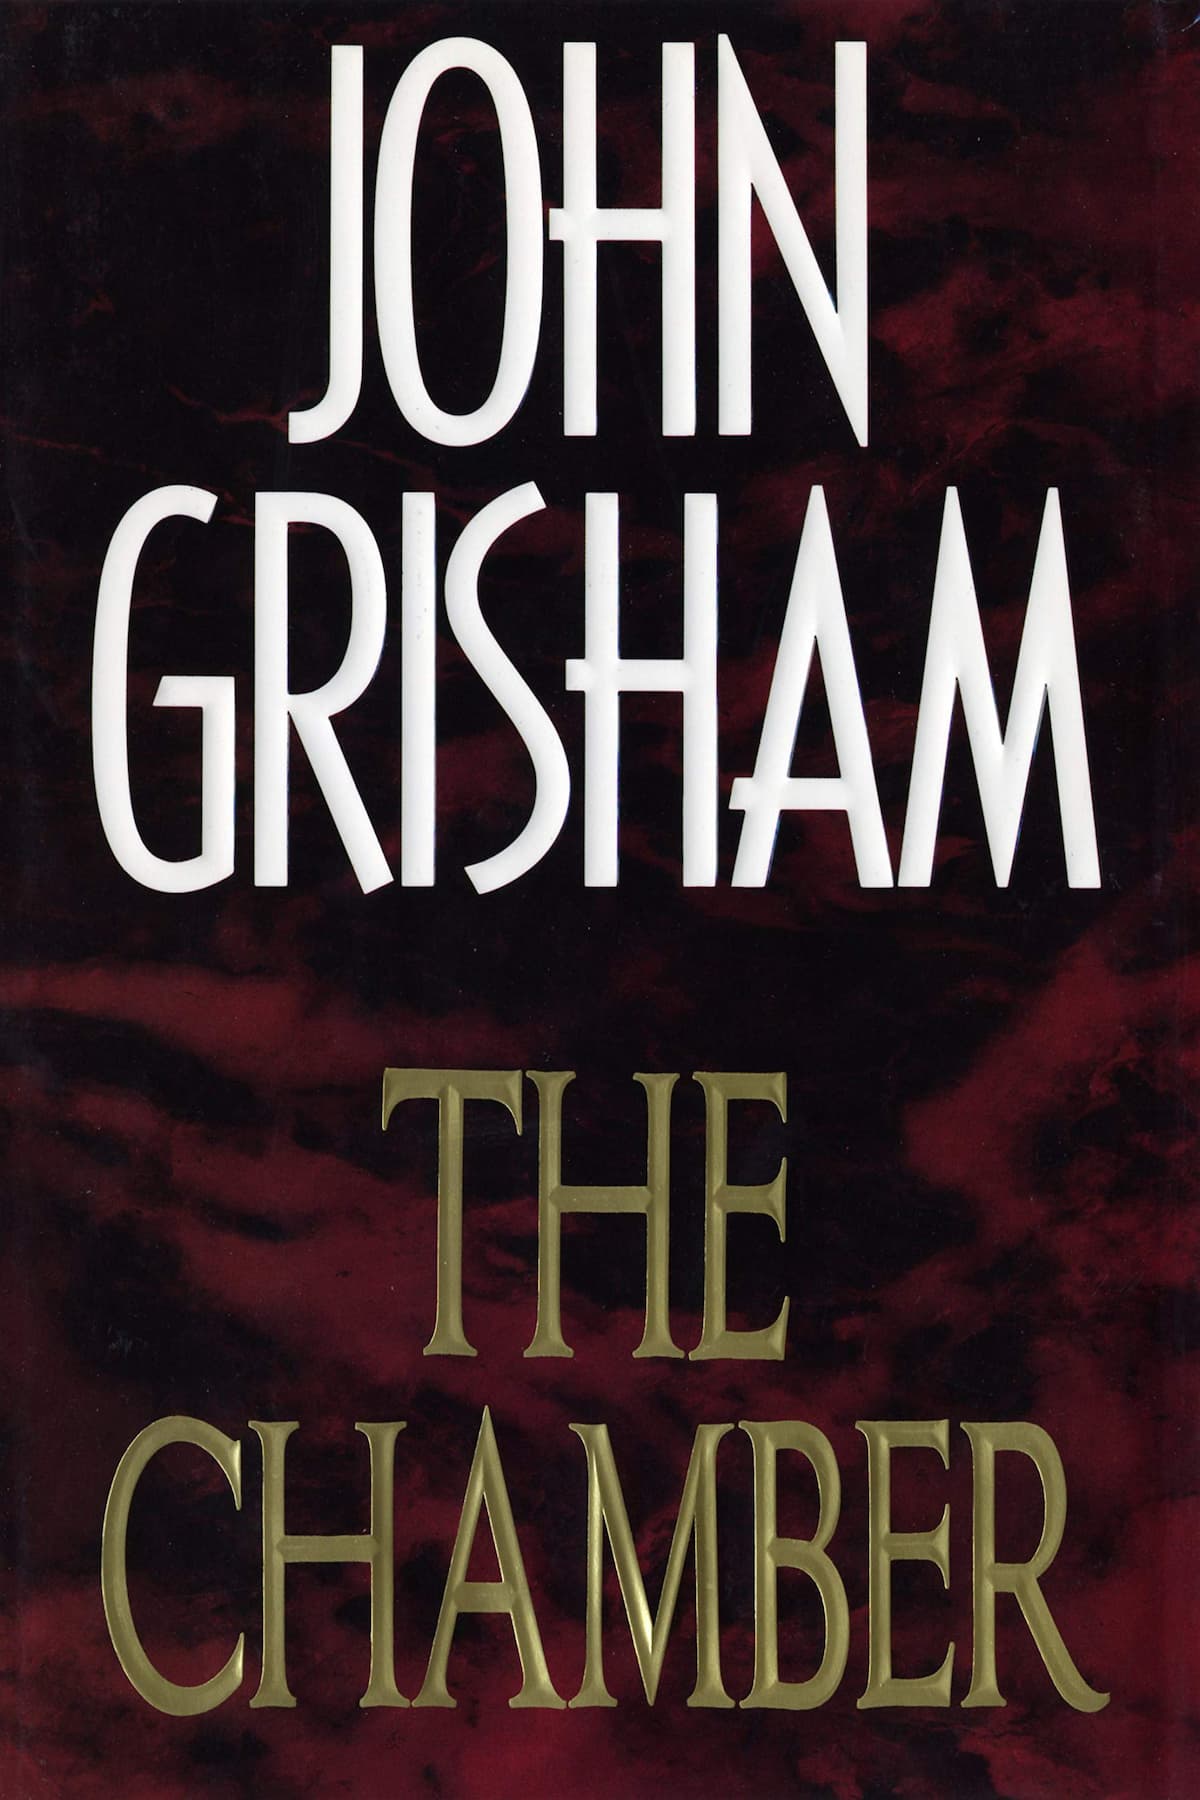 If you’re one who enjoys recharging your energies during the holidays, you’ll find "The Chamber – John Grisham" very helpful!